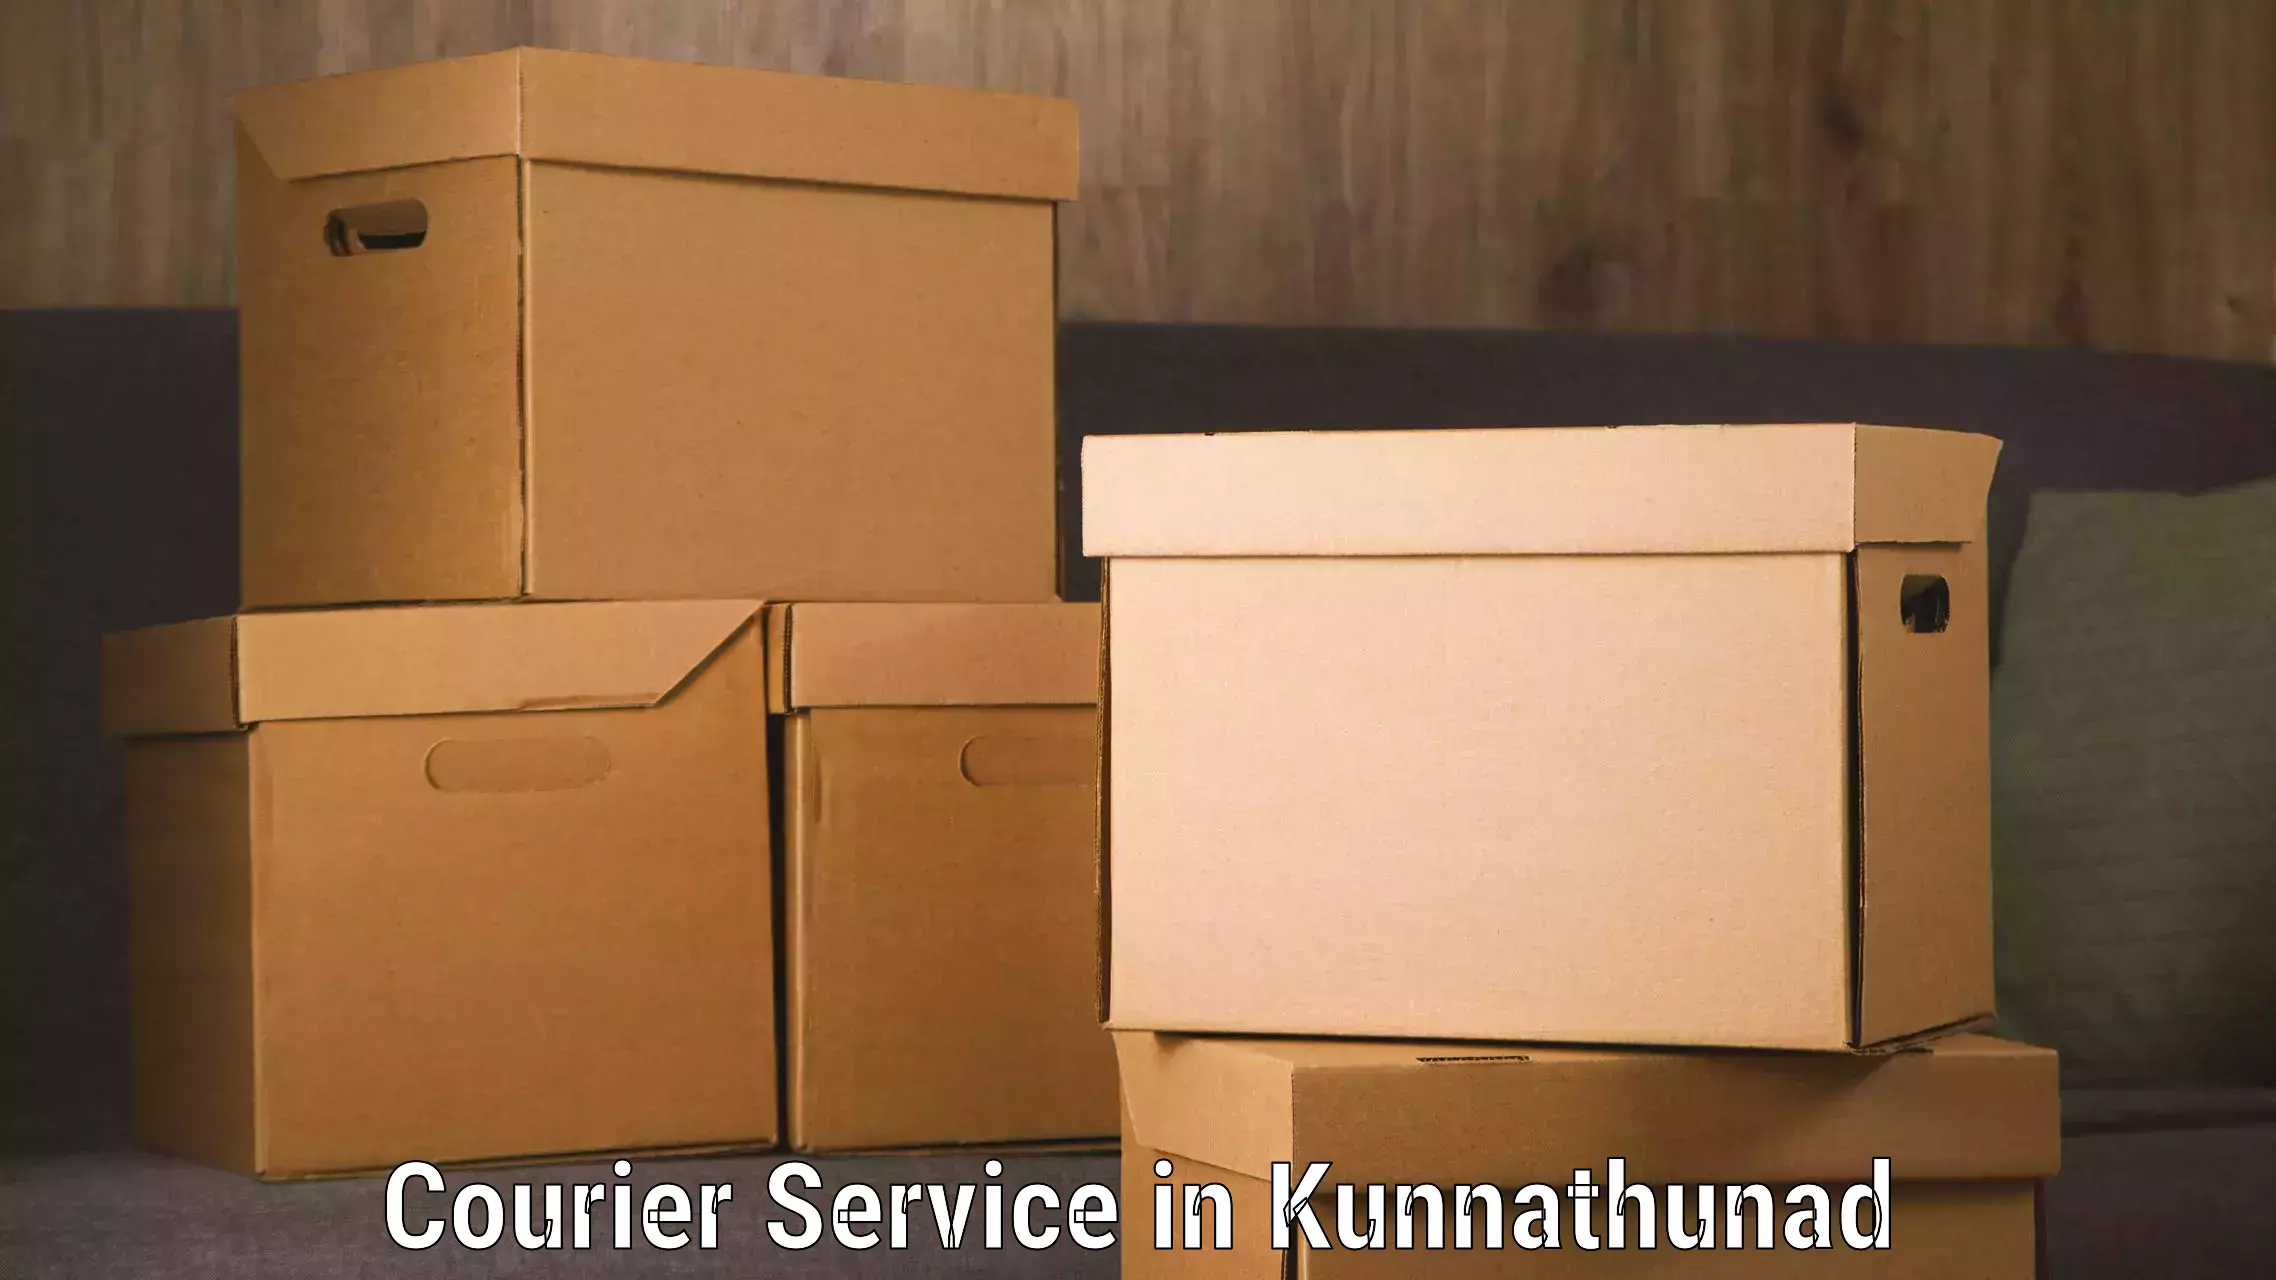 Personal parcel delivery in Kunnathunad